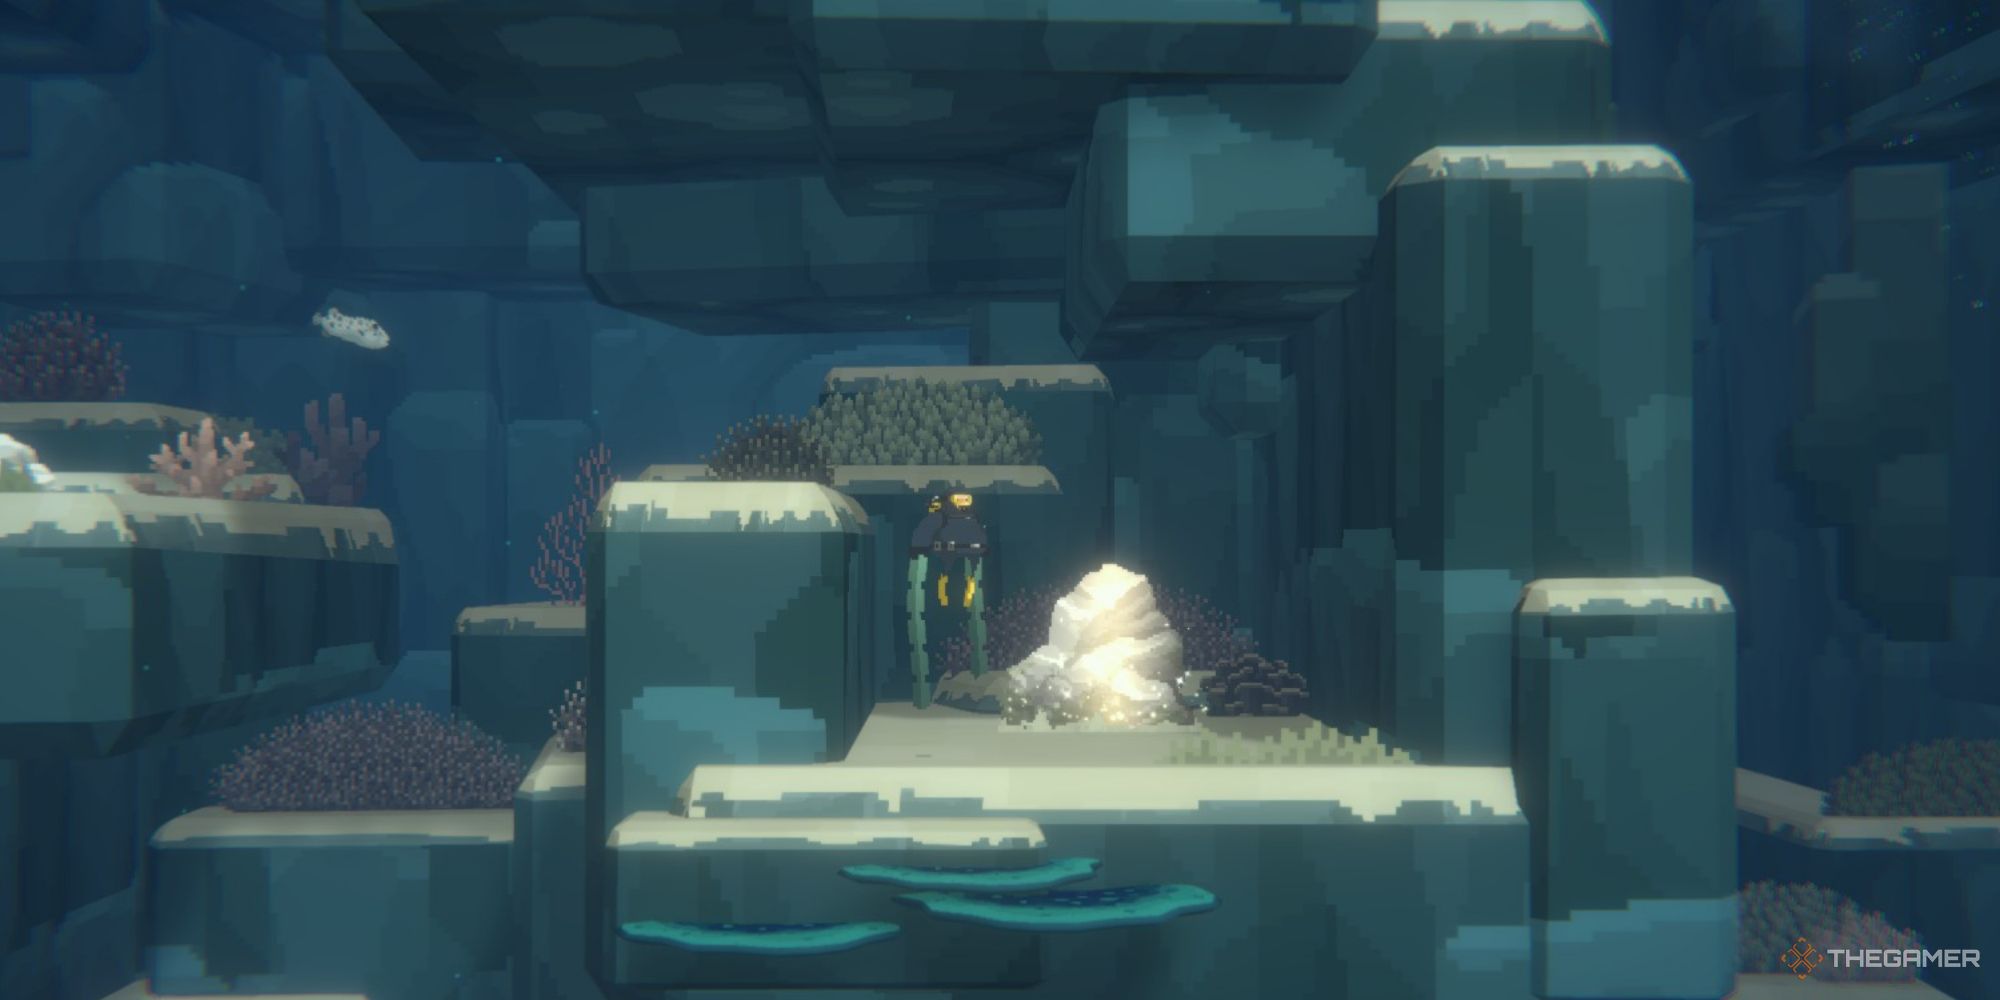 A screenshot from Dave the Diver showing Dave in the early depths floating next to a shiny rock that is a light silver color with a sheen across it.